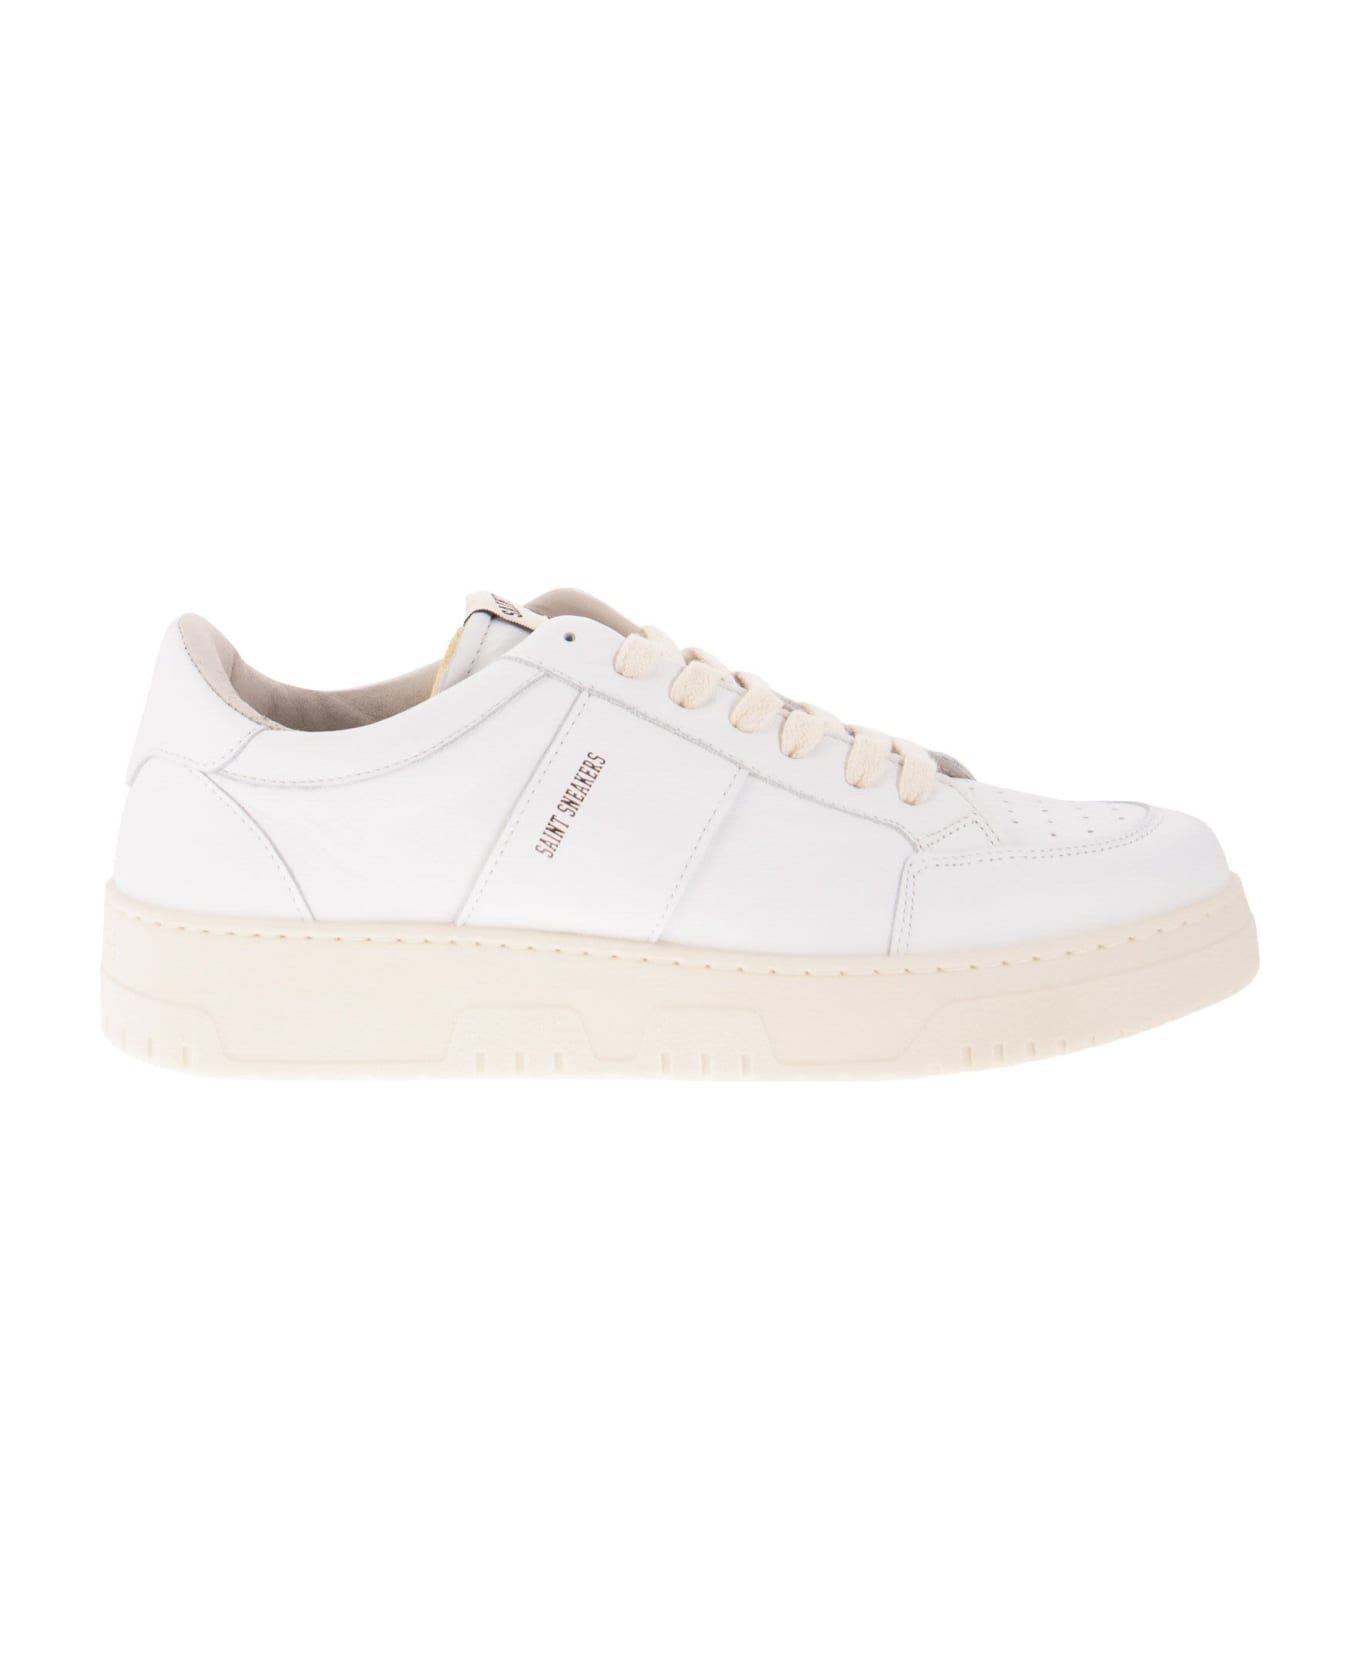 Saint Sneakers Golf - White Trainers - White